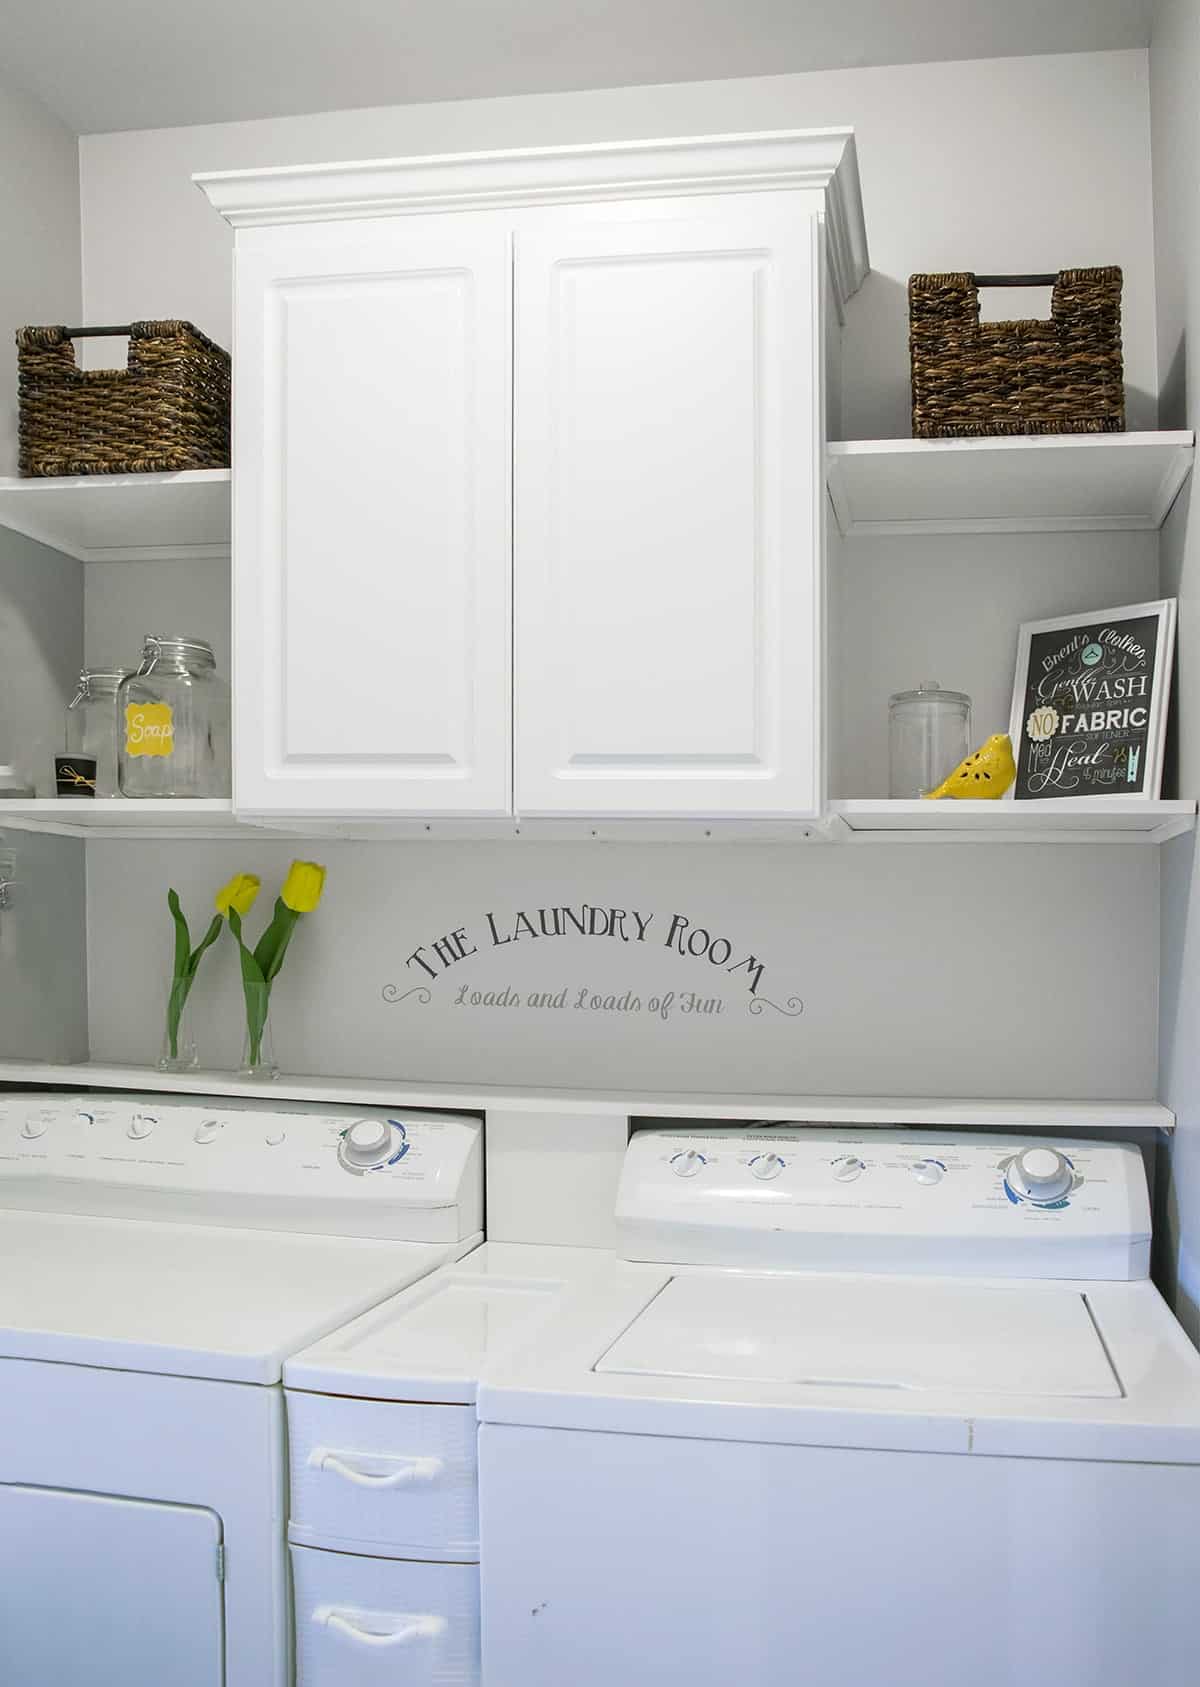 DIY Laundry Room Shelves And Storage Ideas For A Small Space - Angie's Roost